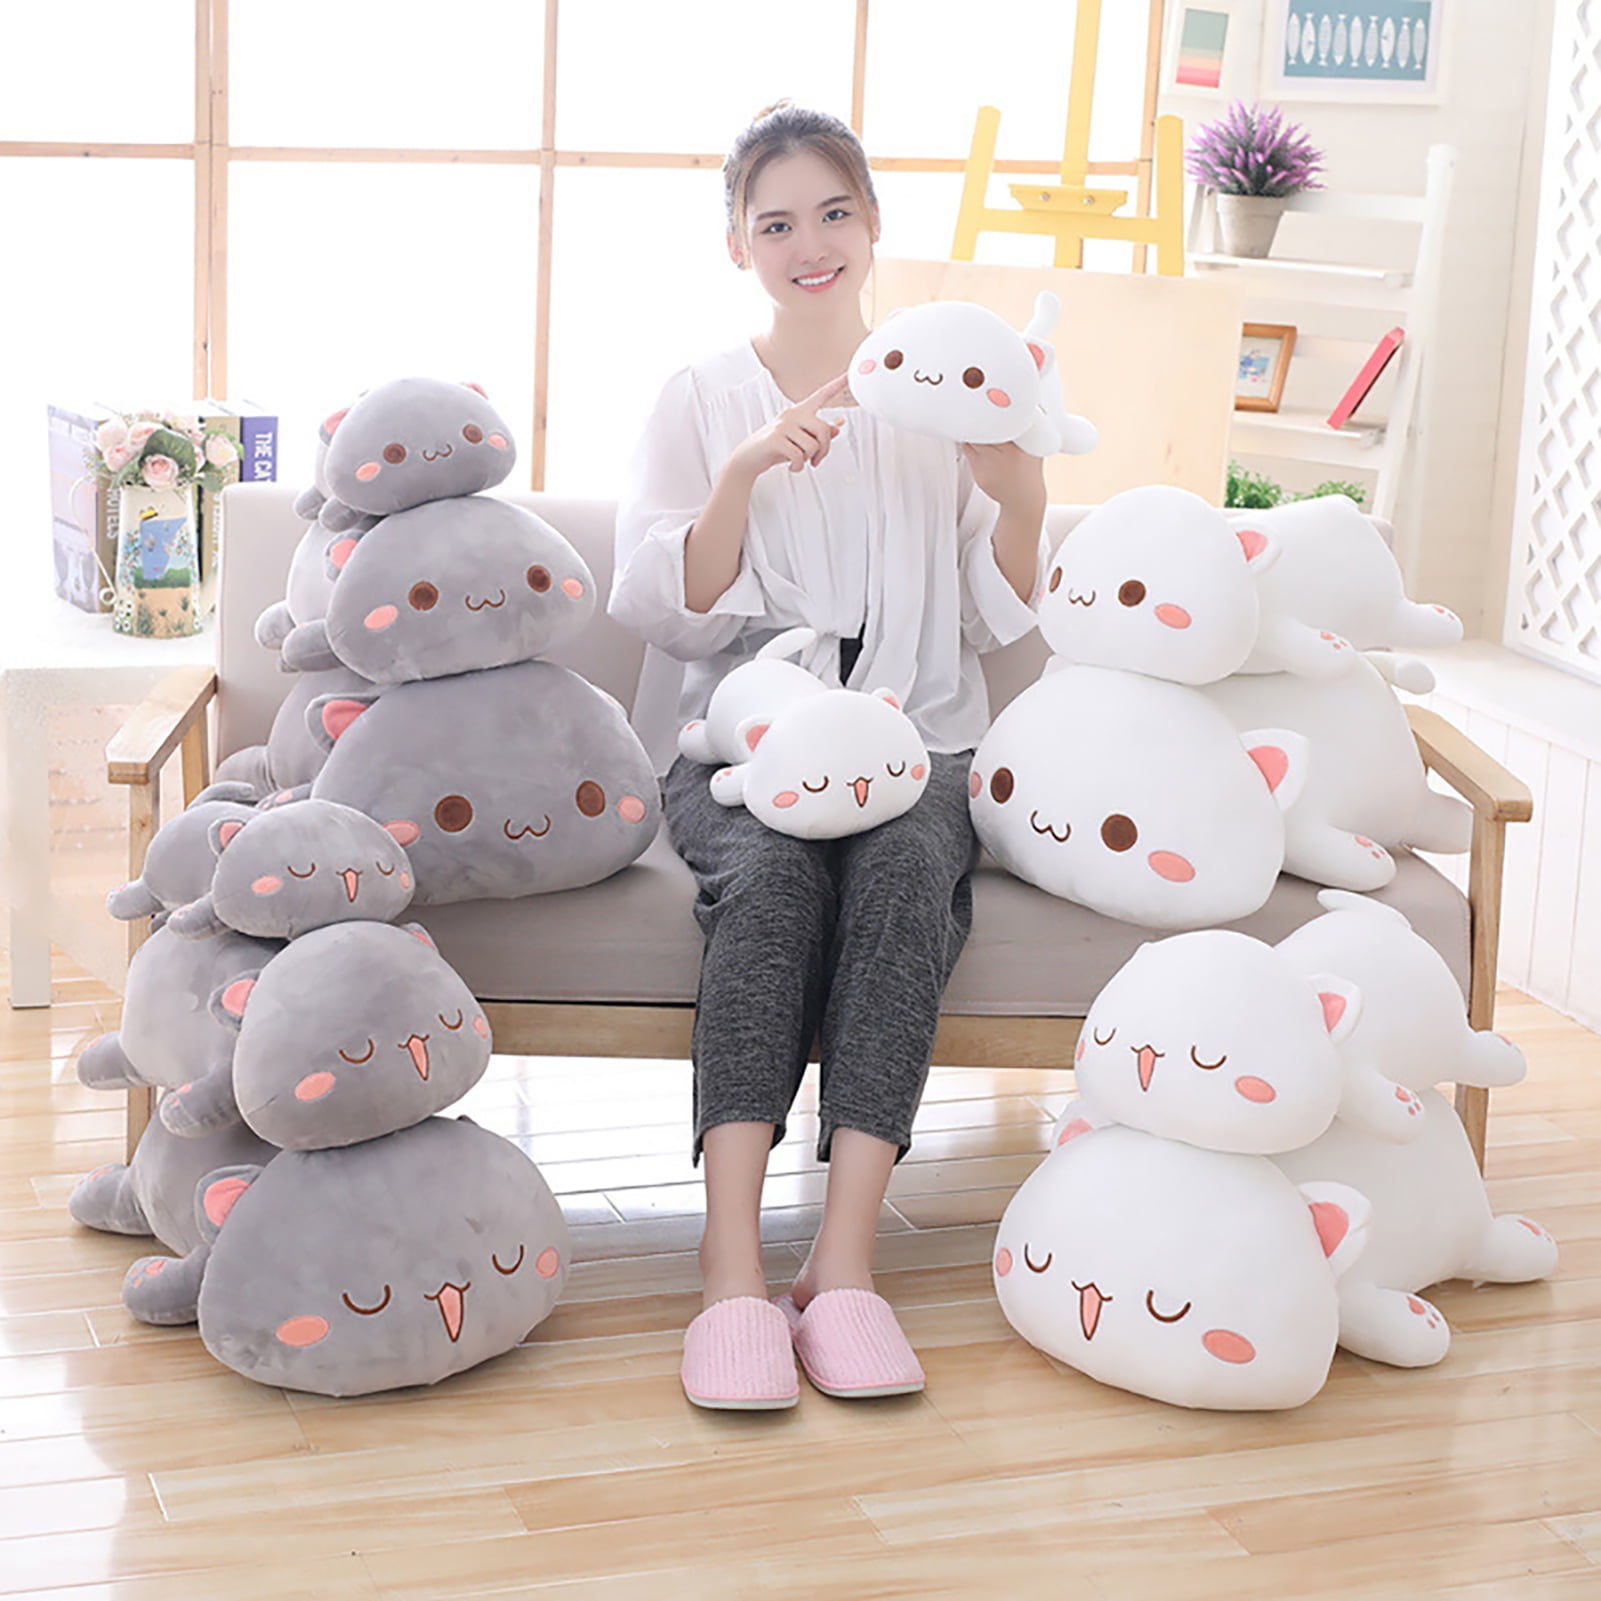 New/Stuffed Seal Plush Pillow 30cm/Giant Big Doll Toy Kid Chair Chest Pets Gifts 